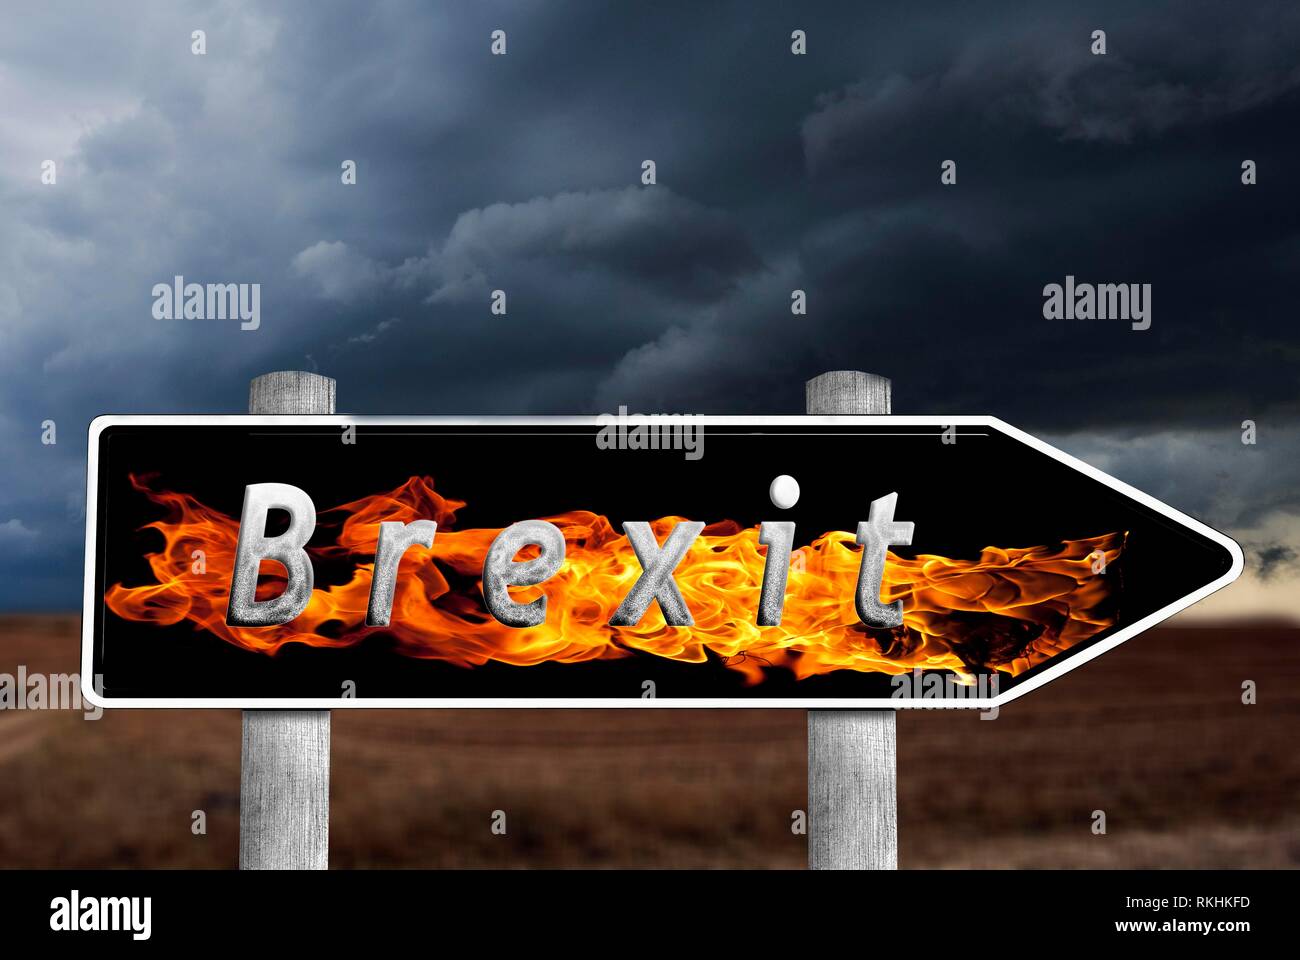 Signpost with flames and lettering Brexit, threatening, thunderstorm atmosphere, symbolic picture leaving EU, Great Britain Stock Photo